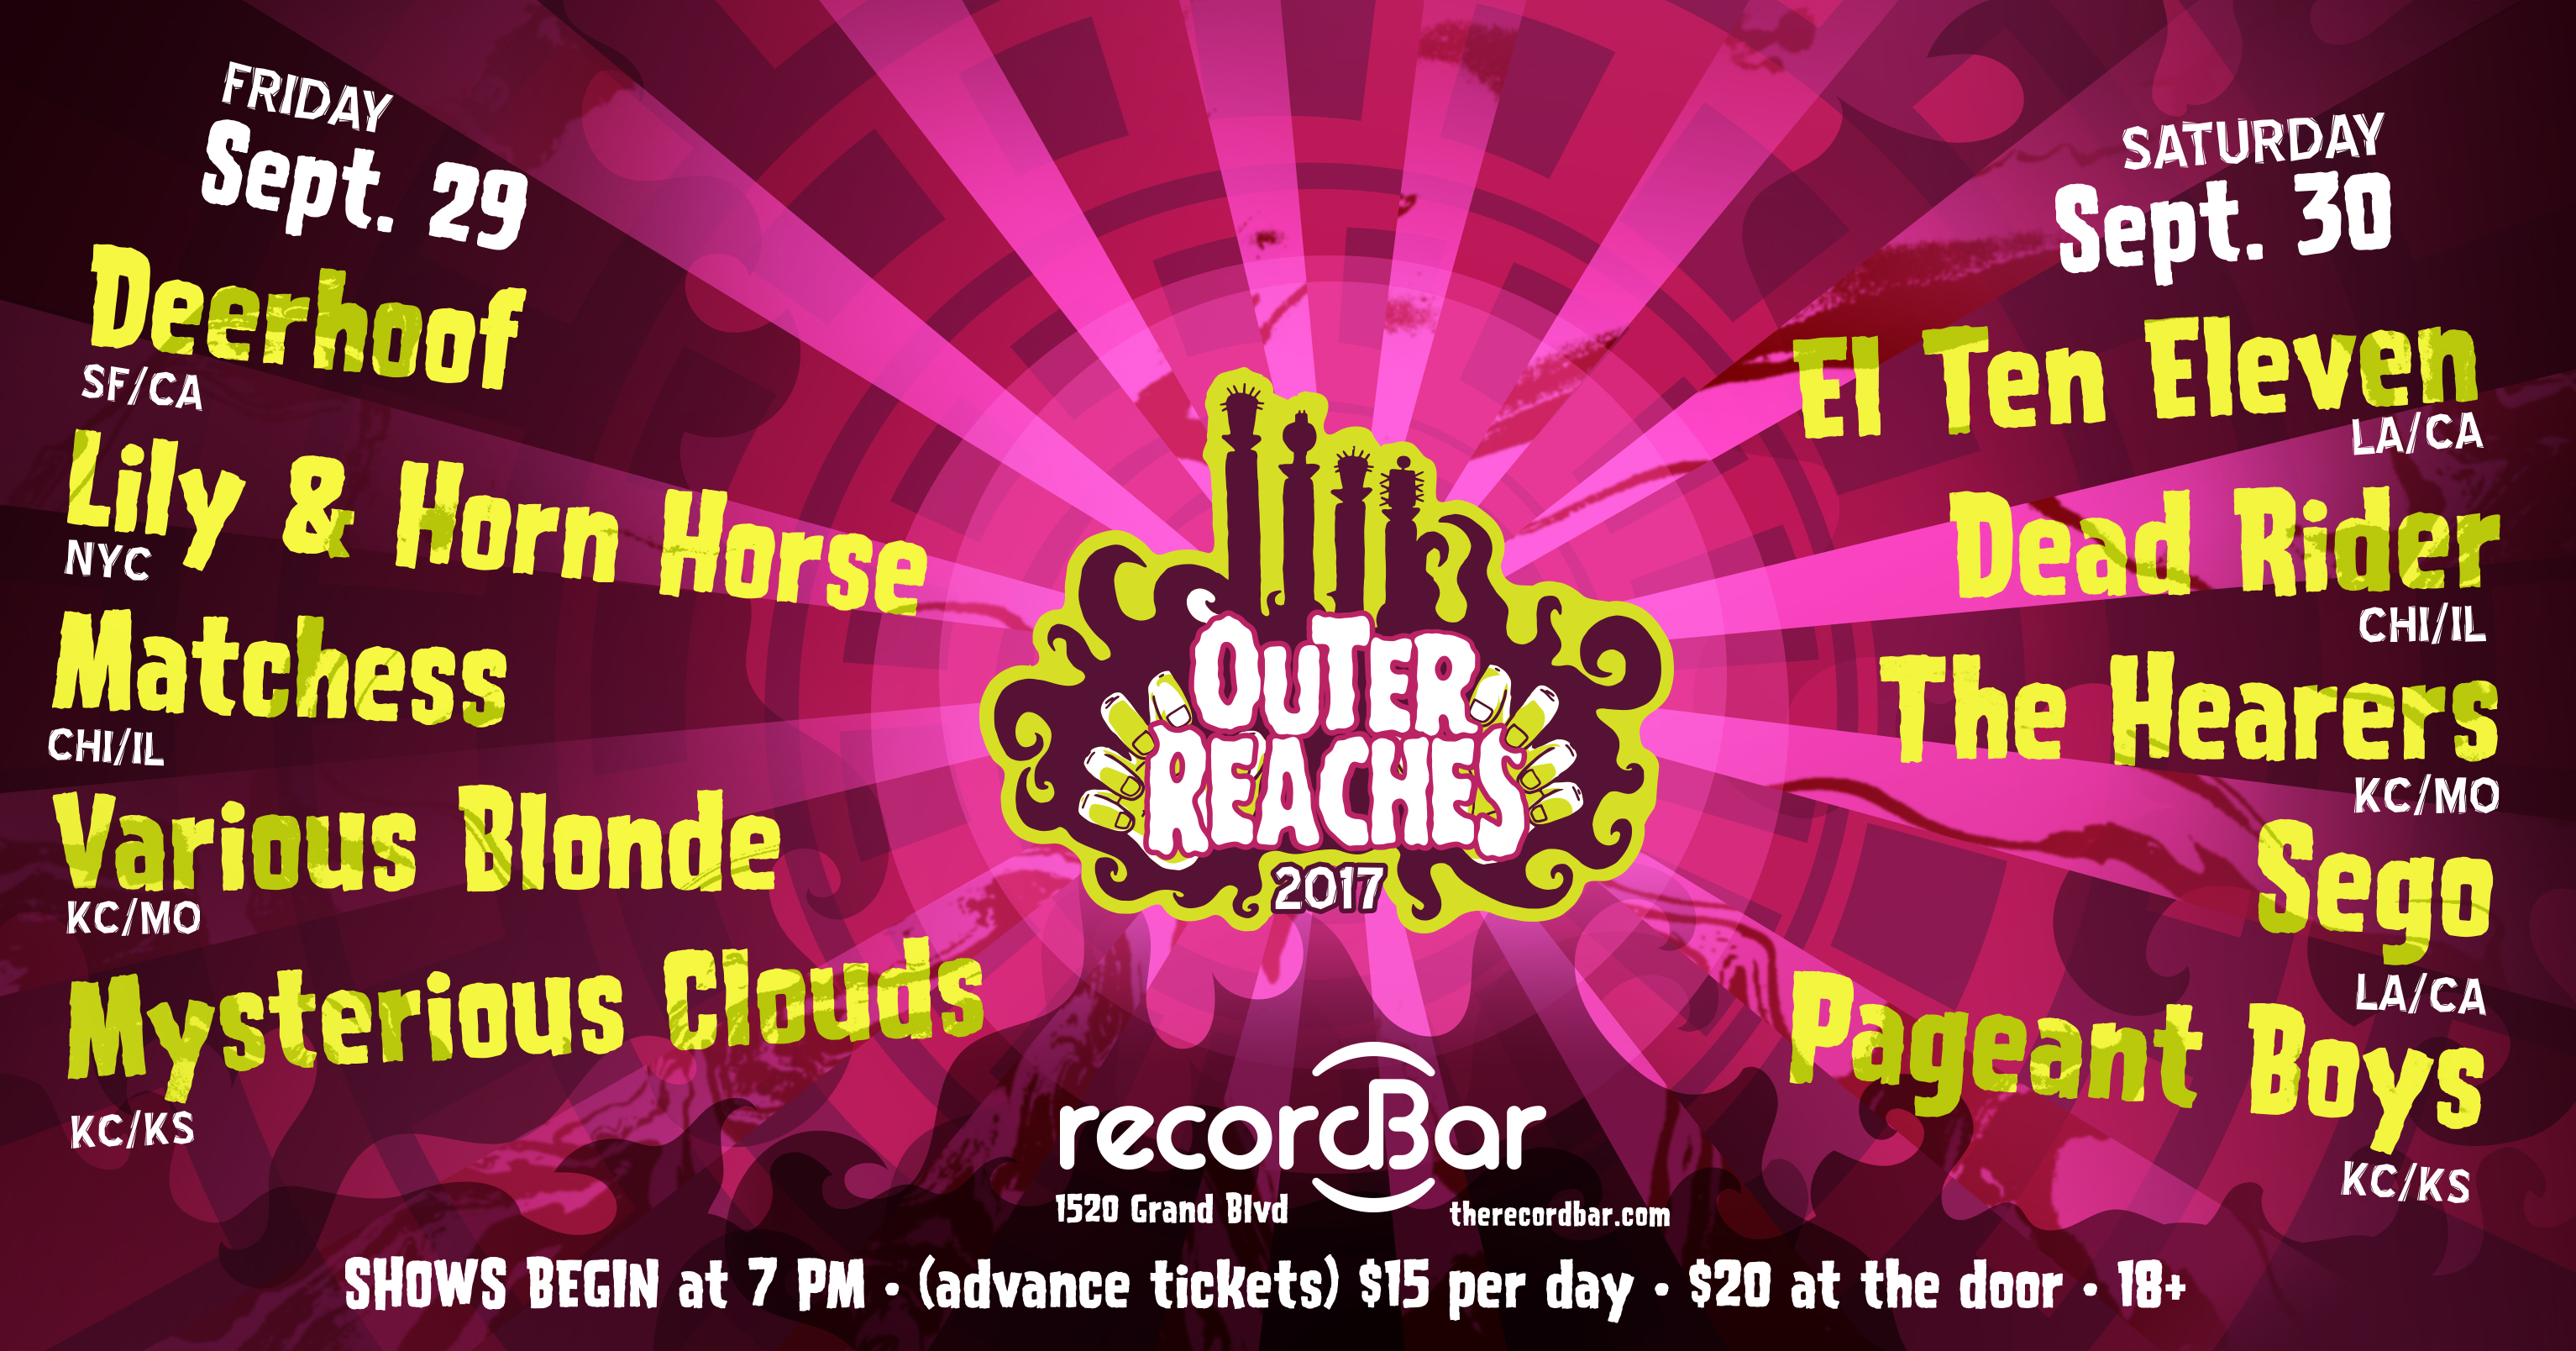 Outer Reaches 2017 Flier (Rect)